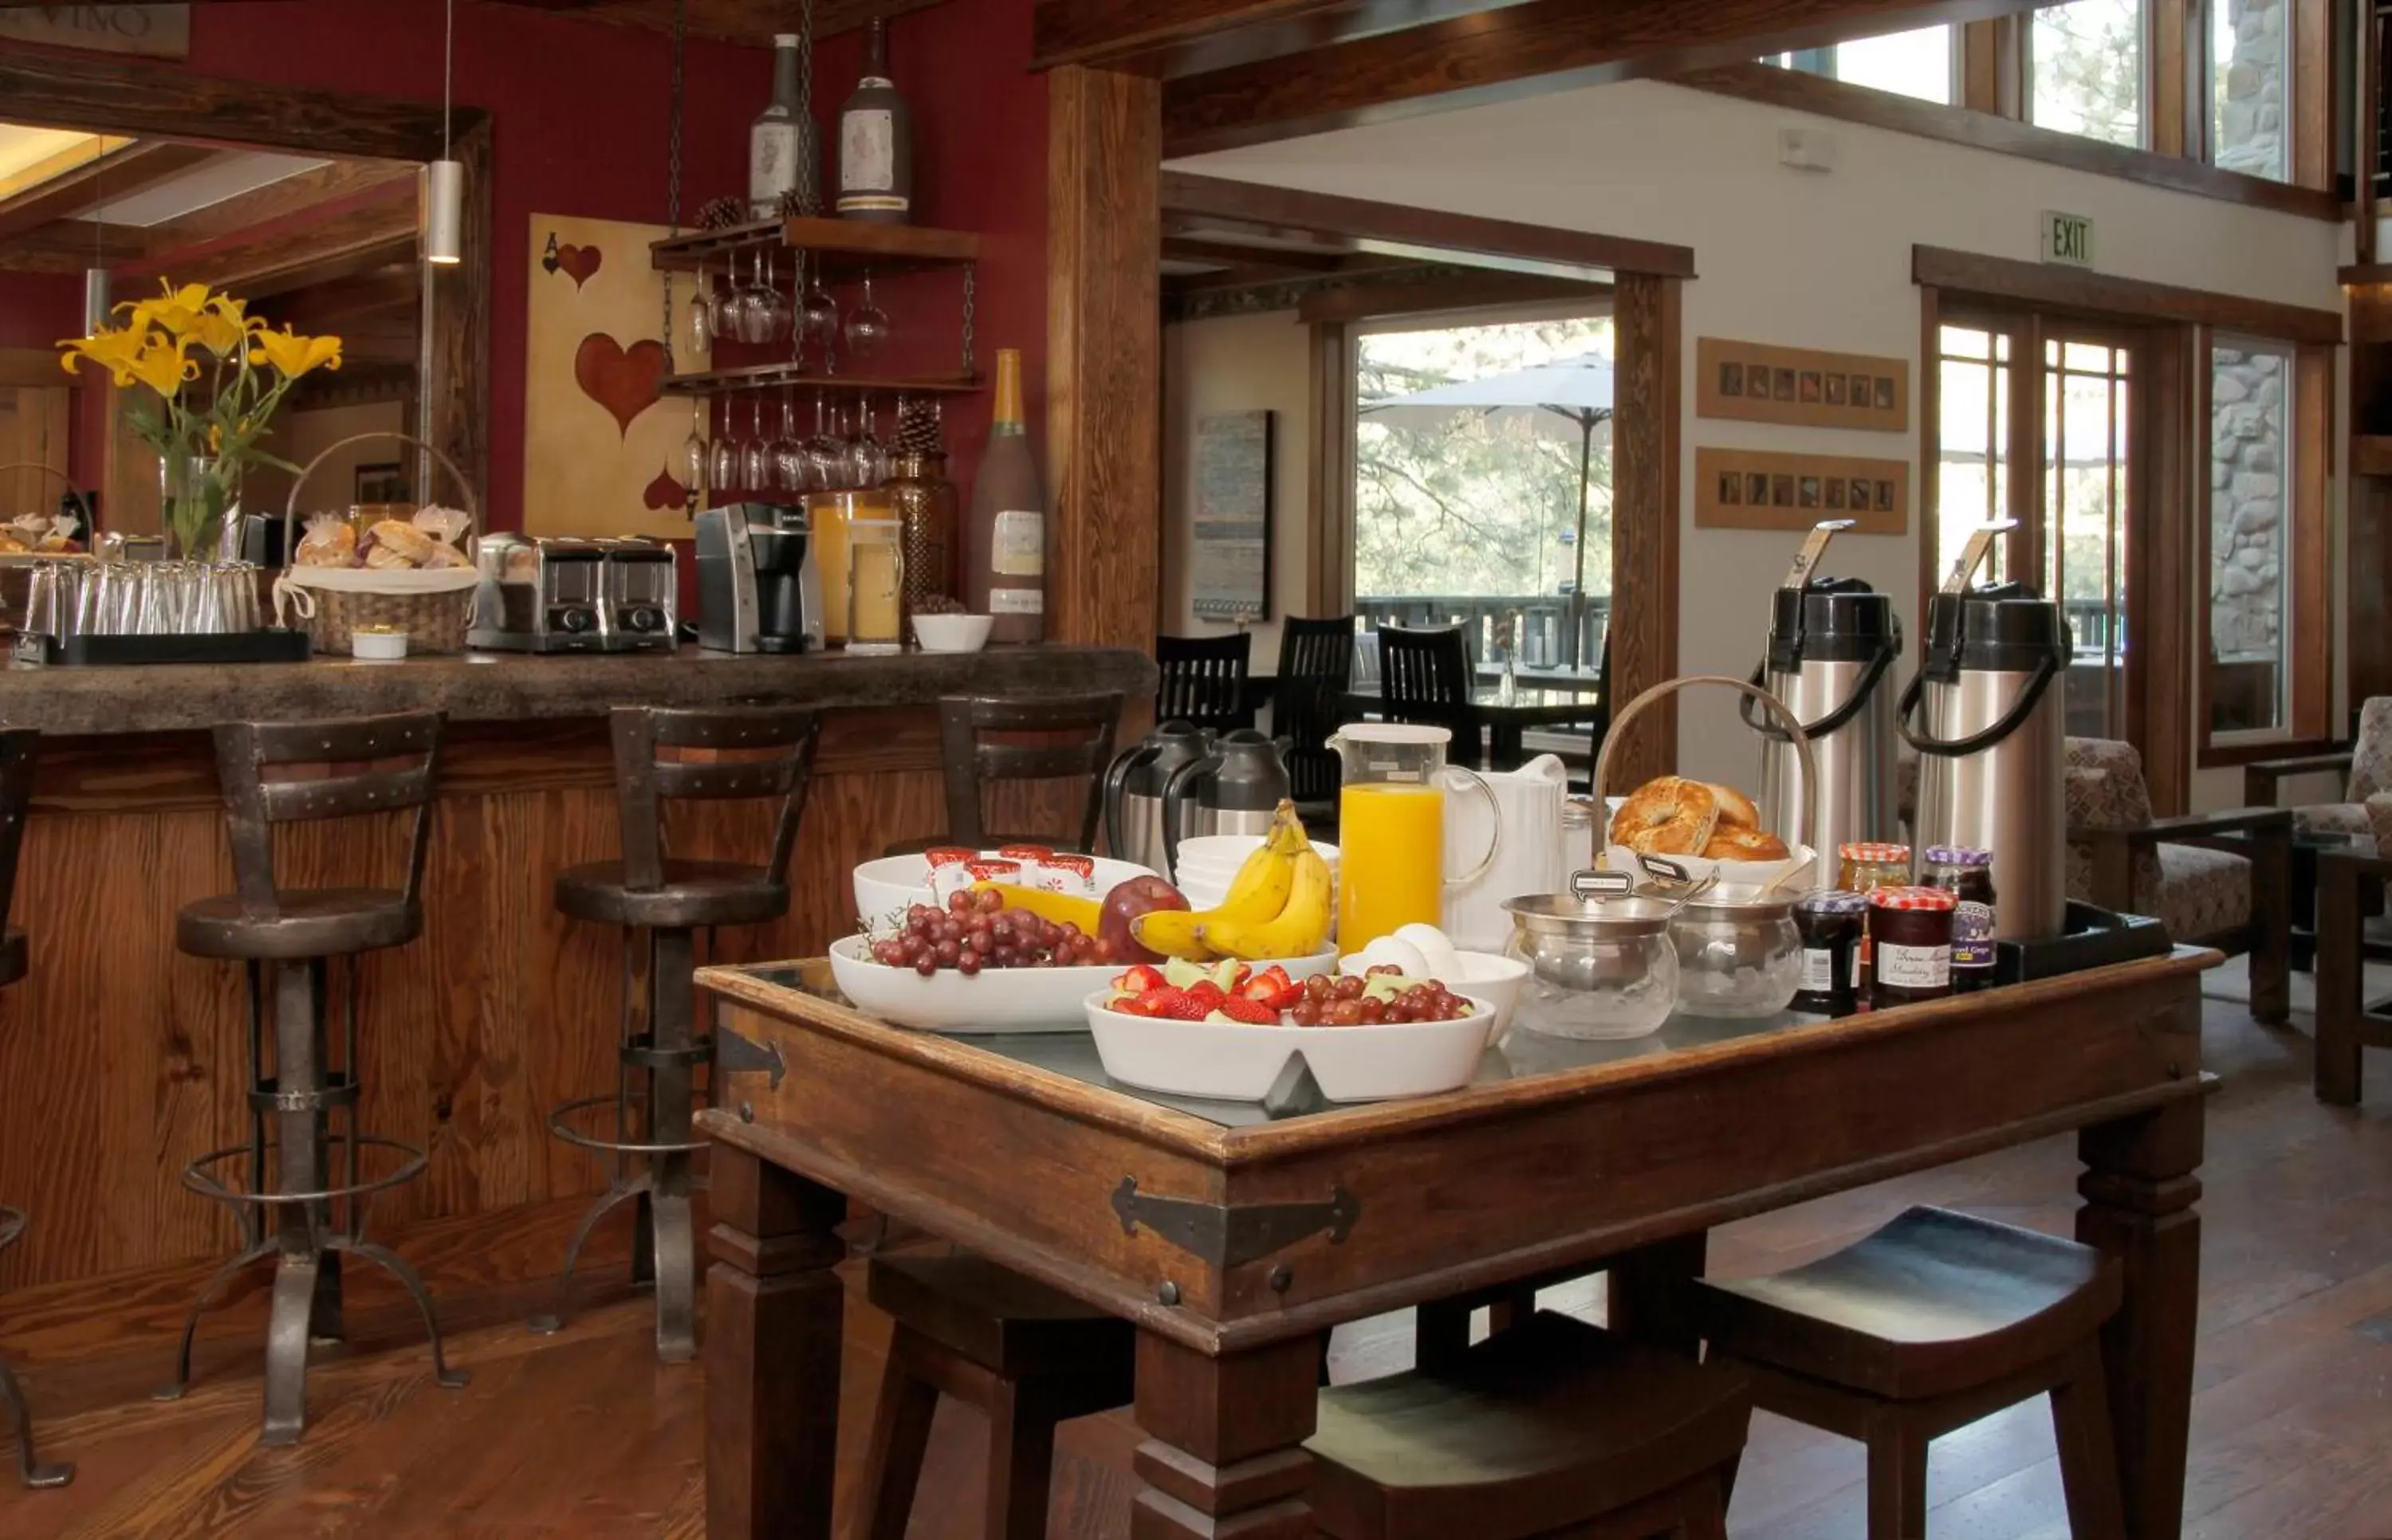 Continental breakfast in The Grand Idyllwild Lodge